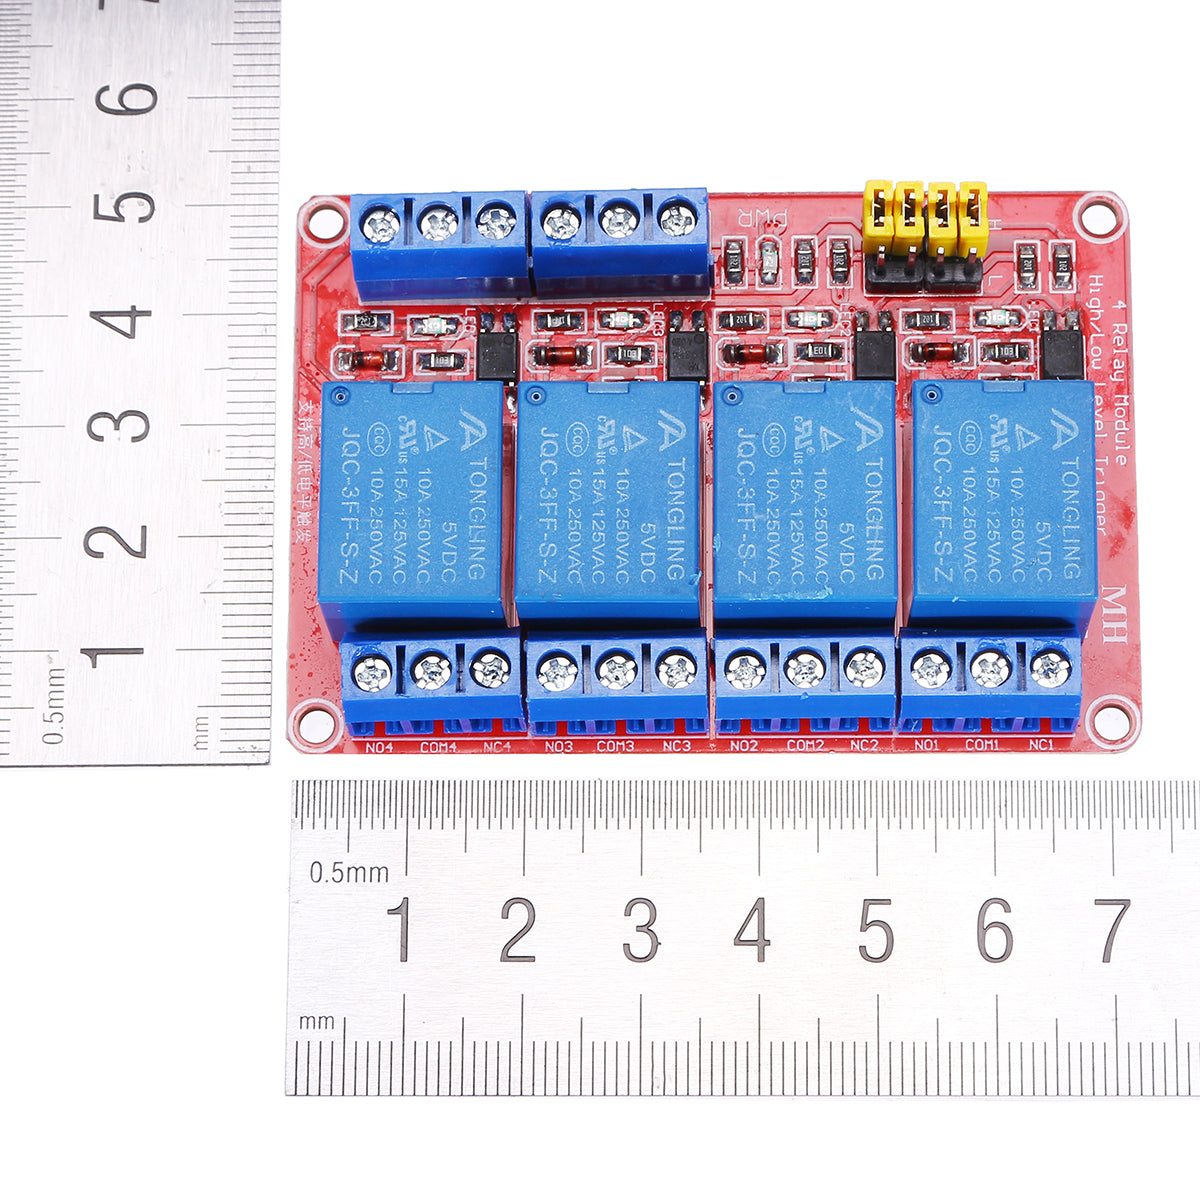 5V 1 / 2 / 4 / 8 Channel Relay High Low Level Optocoupler Module For PI - Auto GoShop